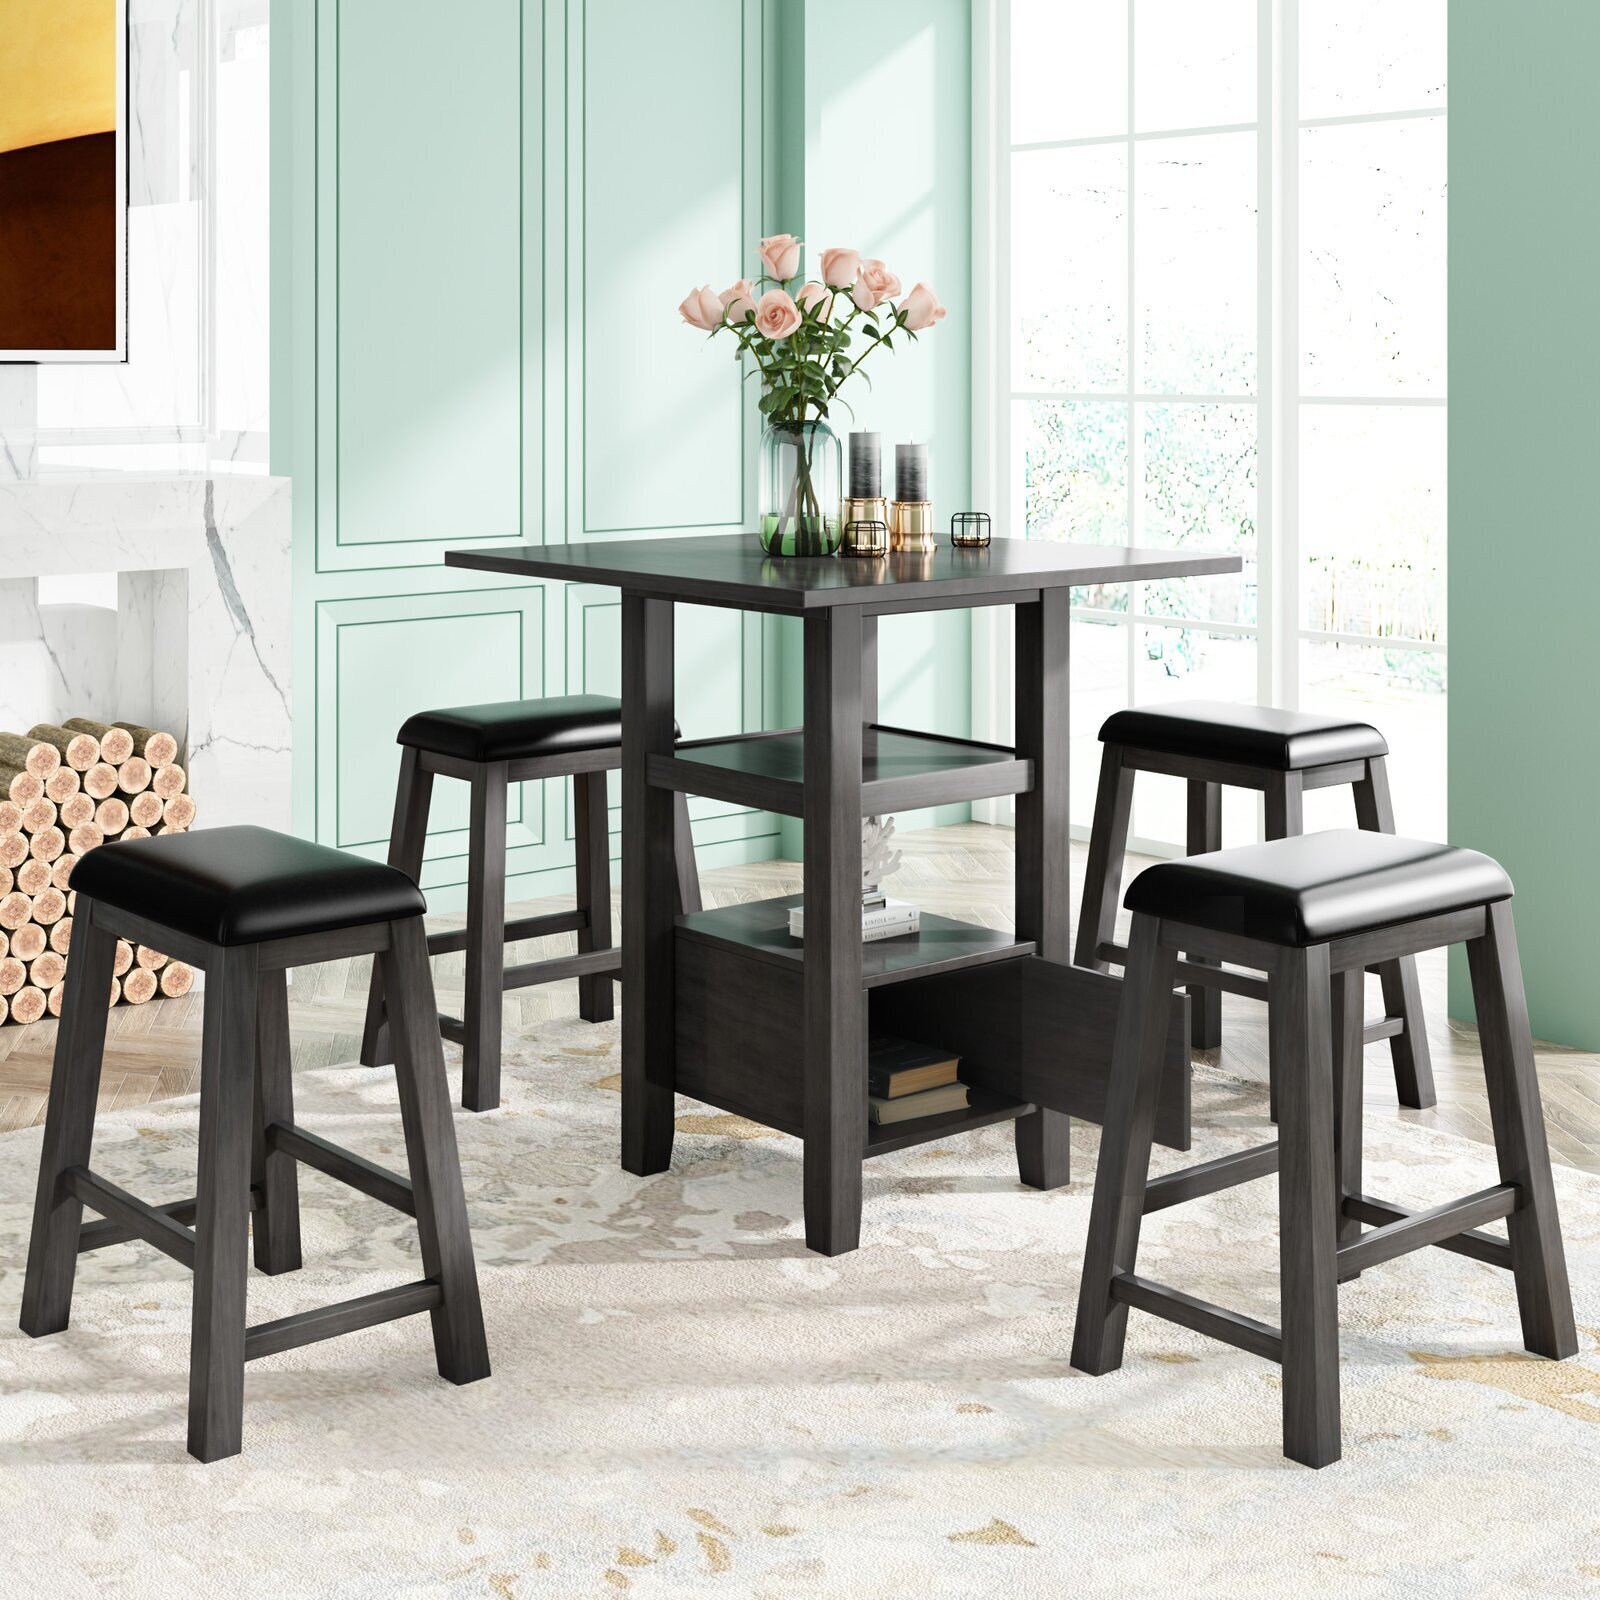 Breakfast Nook Dining Set With Stools